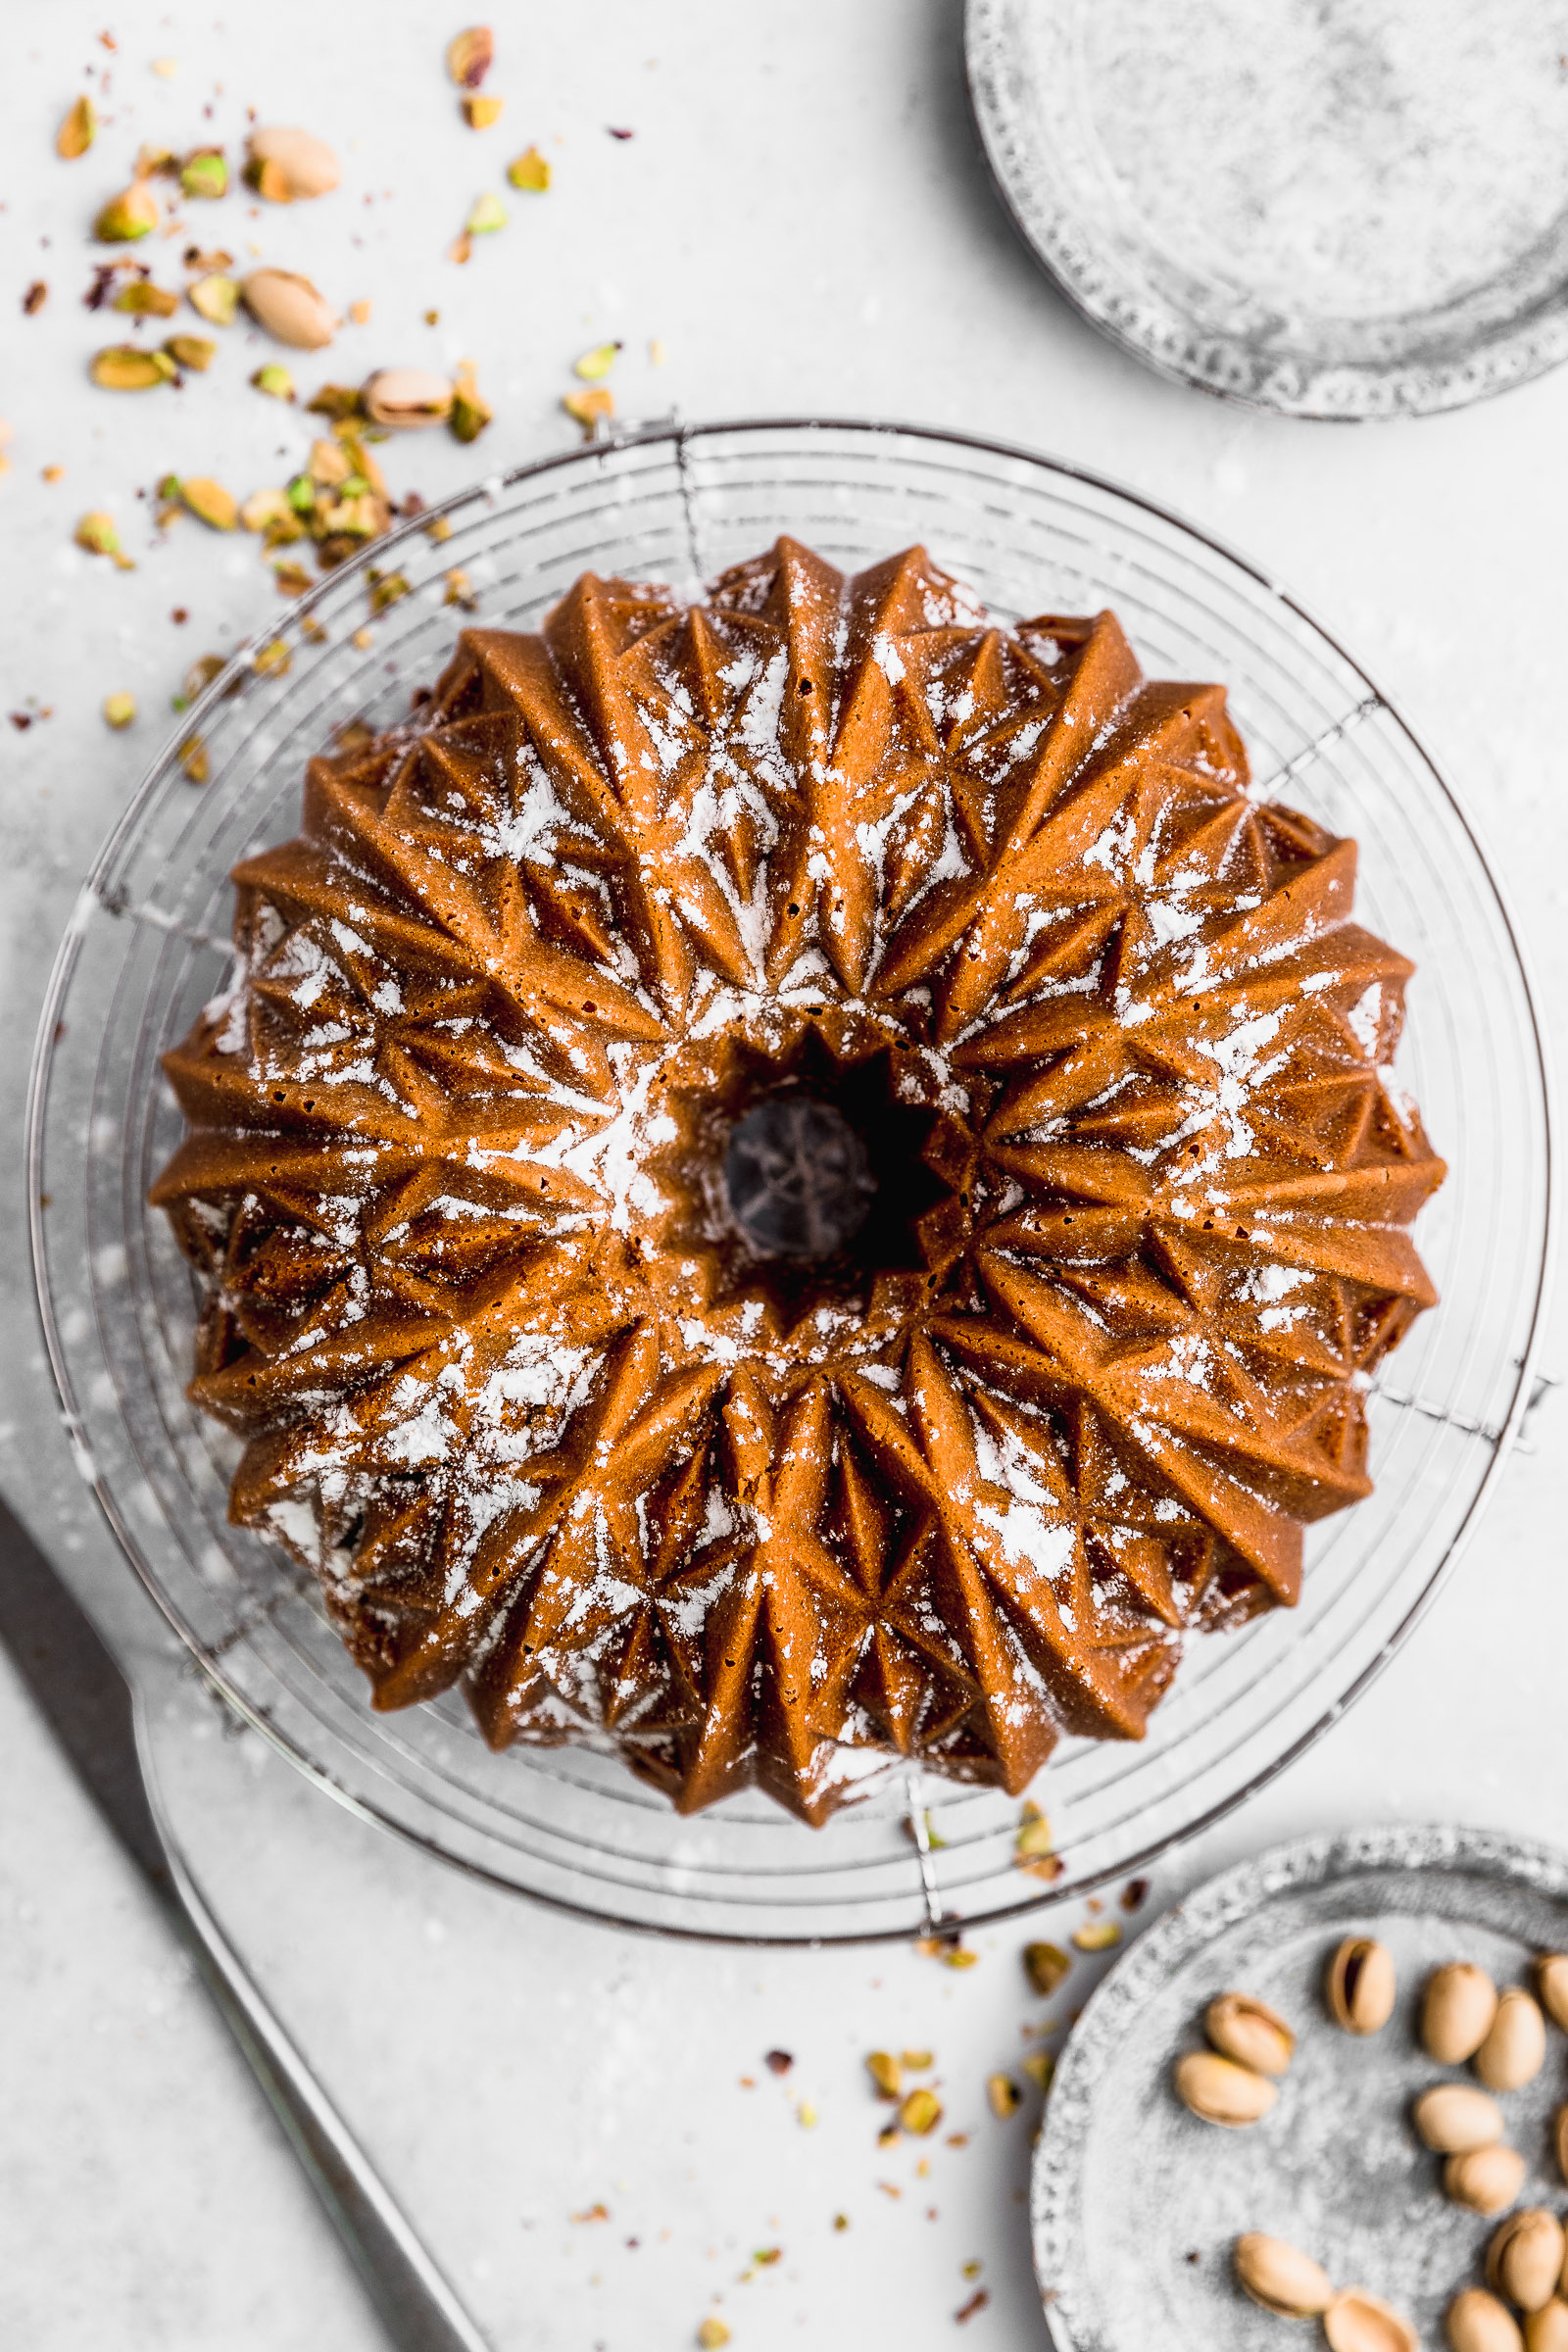 top view of a pistachio bundt cake, dusted with icing sugar.